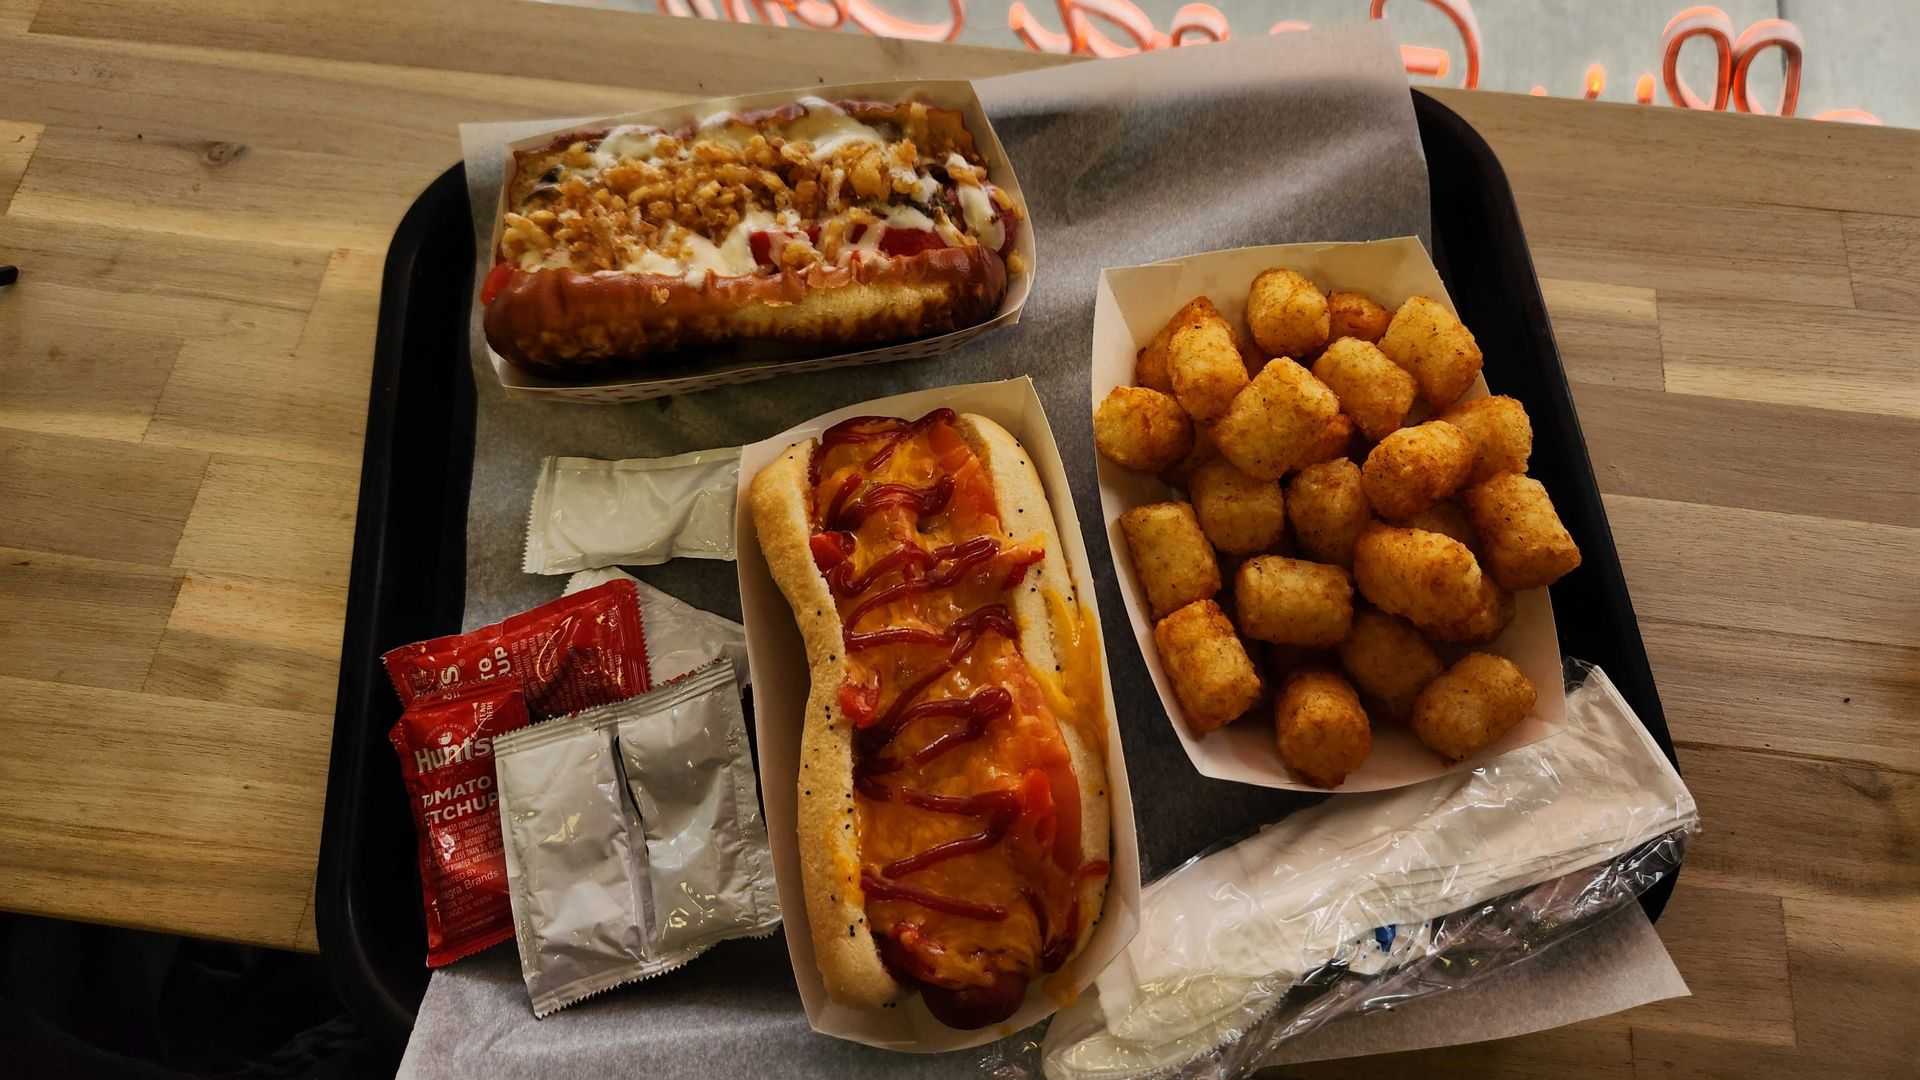 A lunch platter of hot dogs and tater tots.